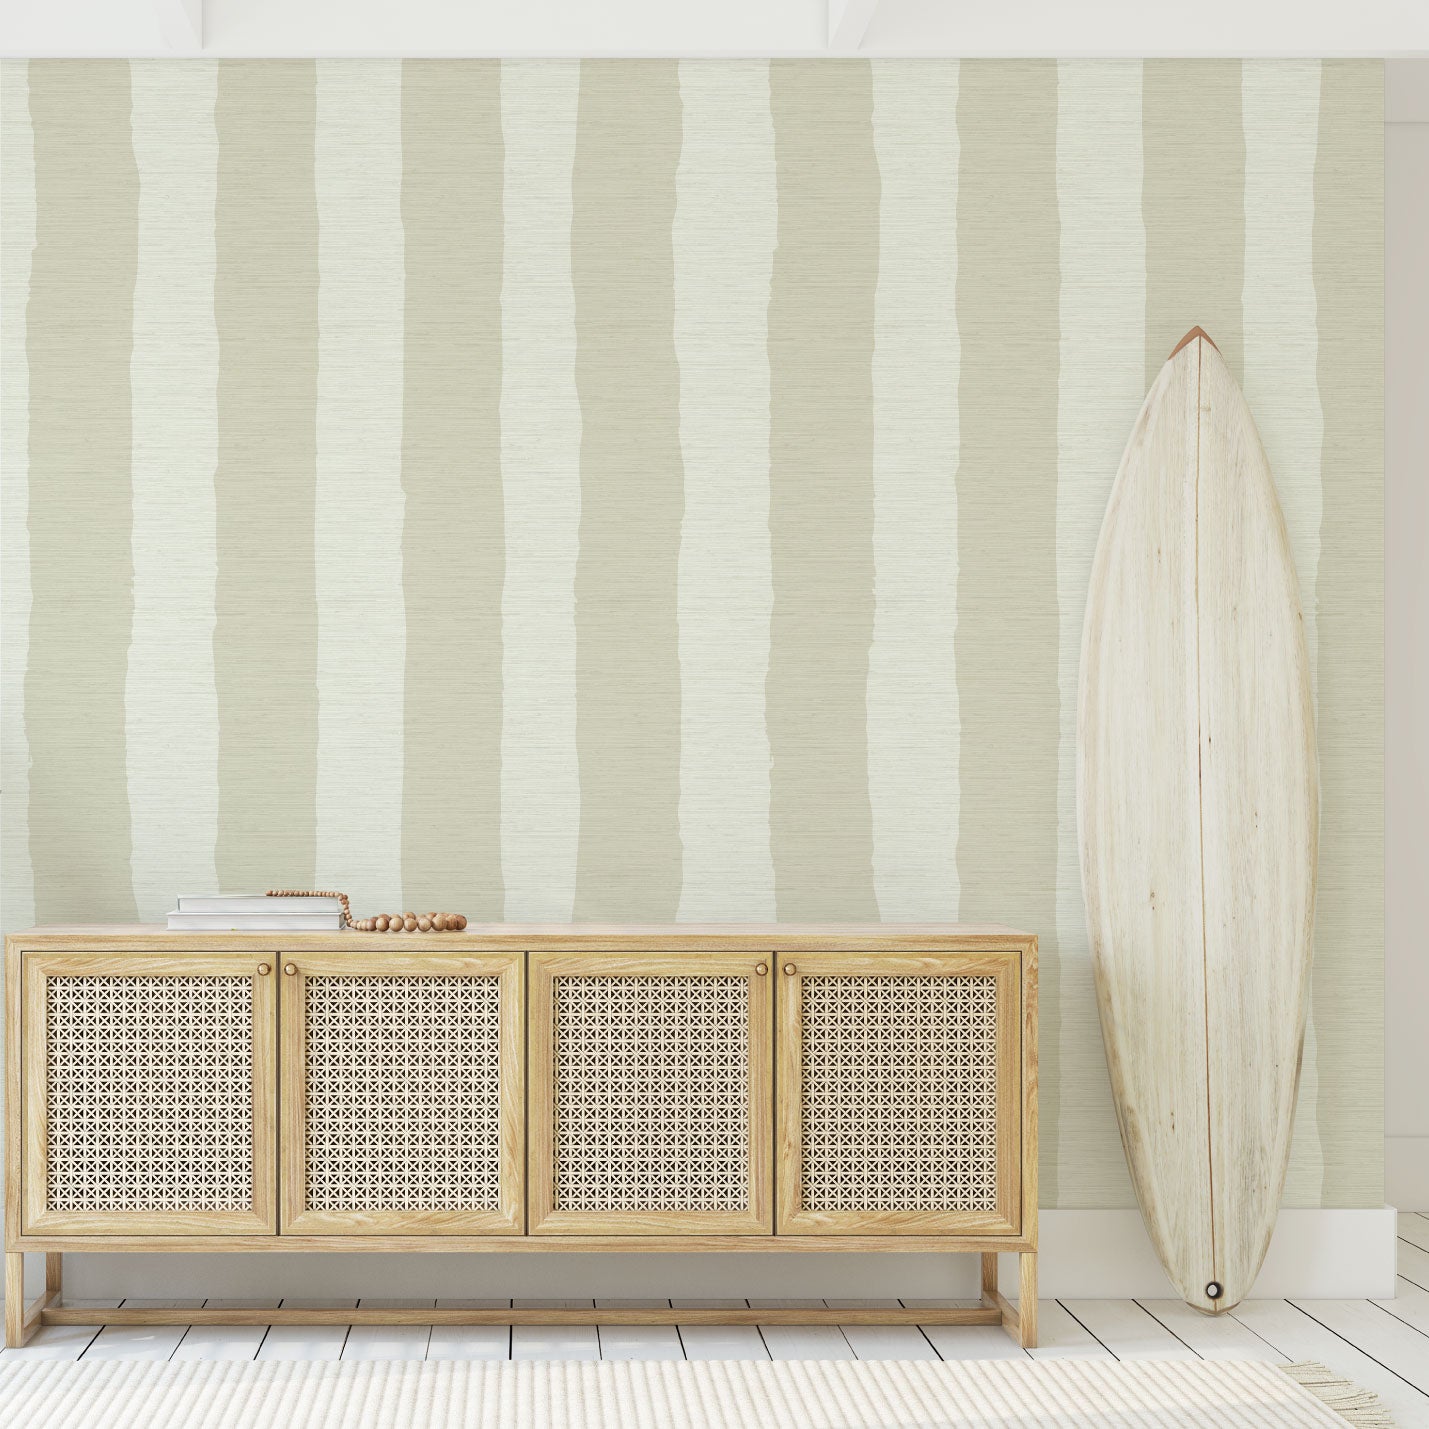 Grasscloth wallpaper Natural Textured Eco-Friendly Non-toxic High-quality  Sustainable Interior Design Bold Custom Tailor-made Retro chic Tropical Jungle Coastal preppy Garden Seaside Coastal Seashore Waterfront Vacation home styling Retreat Relaxed beach vibes Beach cottage Shoreline Oceanfront Nautical wide vertical stripe cabana white cream neutral off-white sand tan beige credenza foyer surf shack entrance 